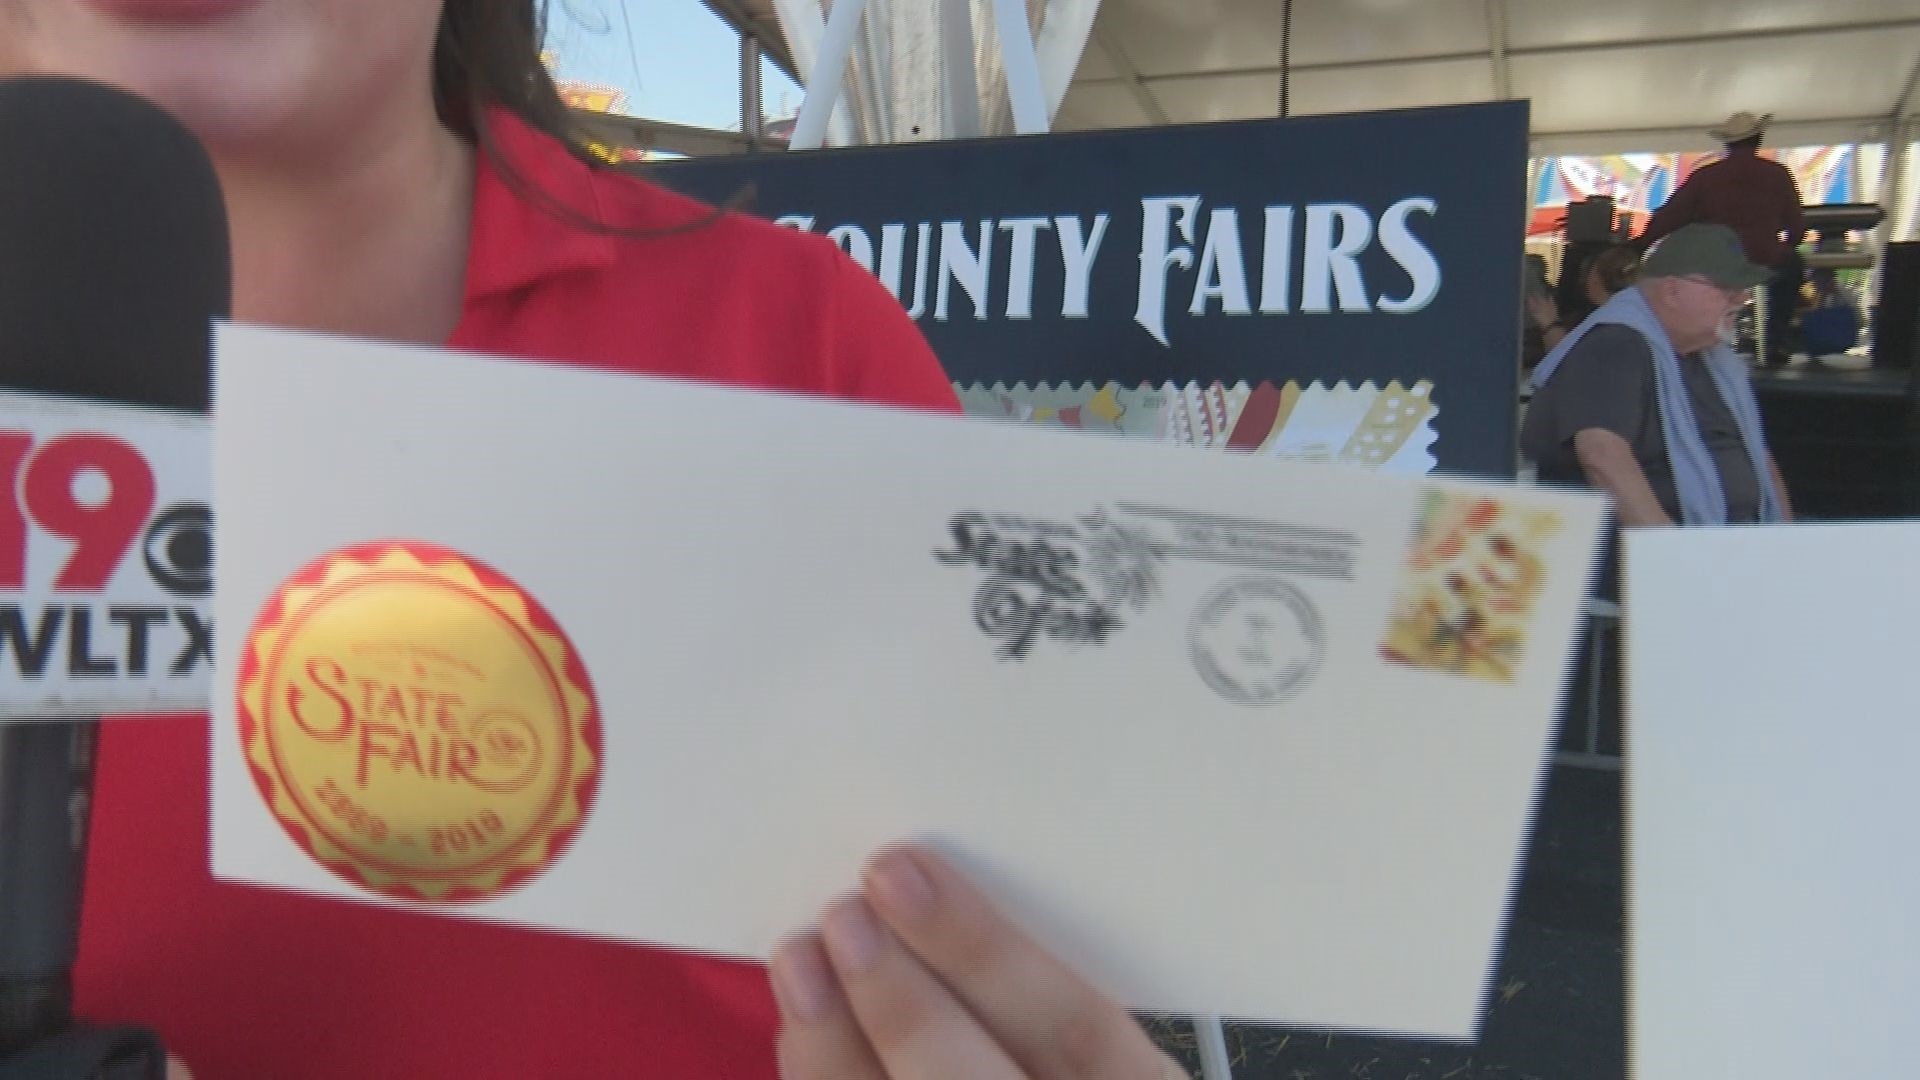 A special South Carolina State Fair 150th Anniversary cancellation stamp is available.